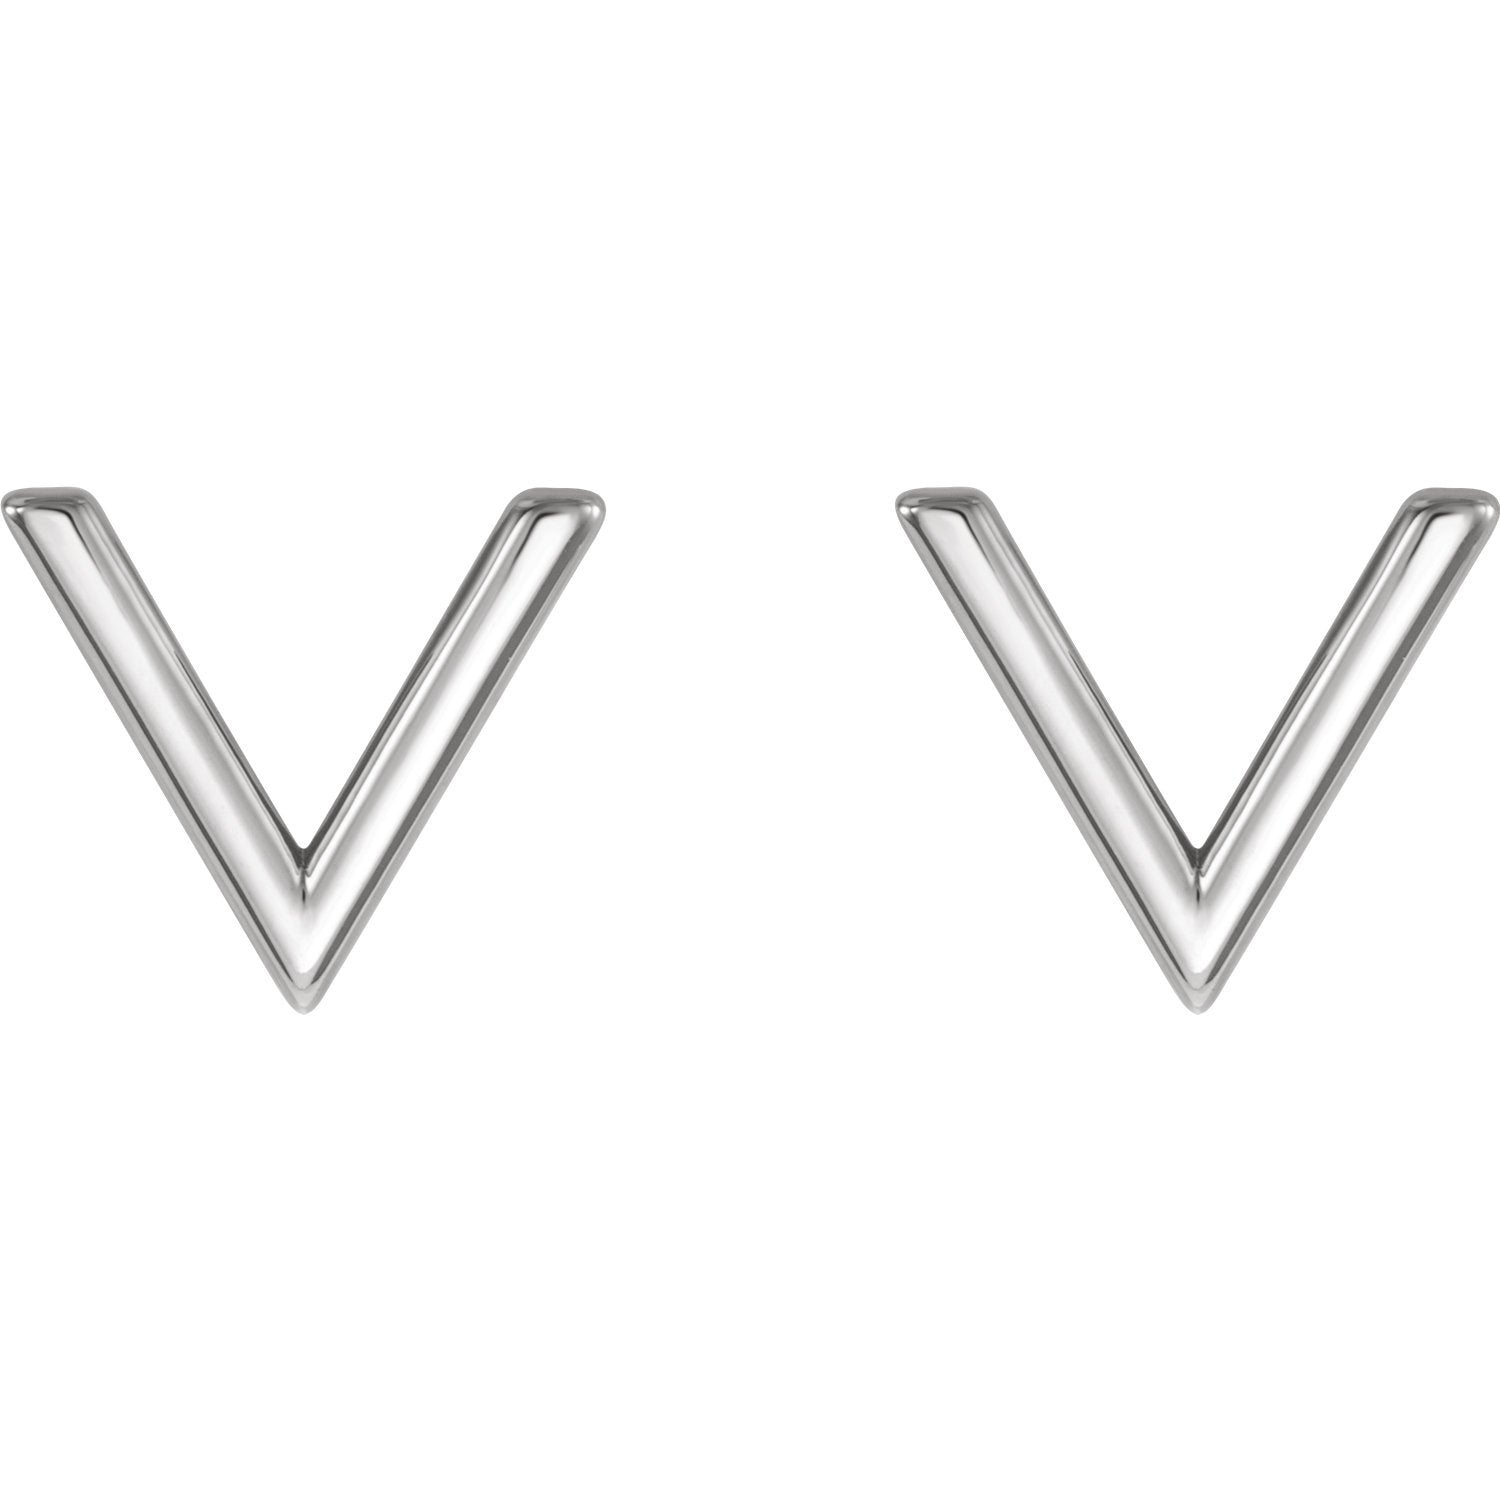 Small "V" Chevron Earrings - 14k Gold (Y or W), Platinum or Sterling Silver